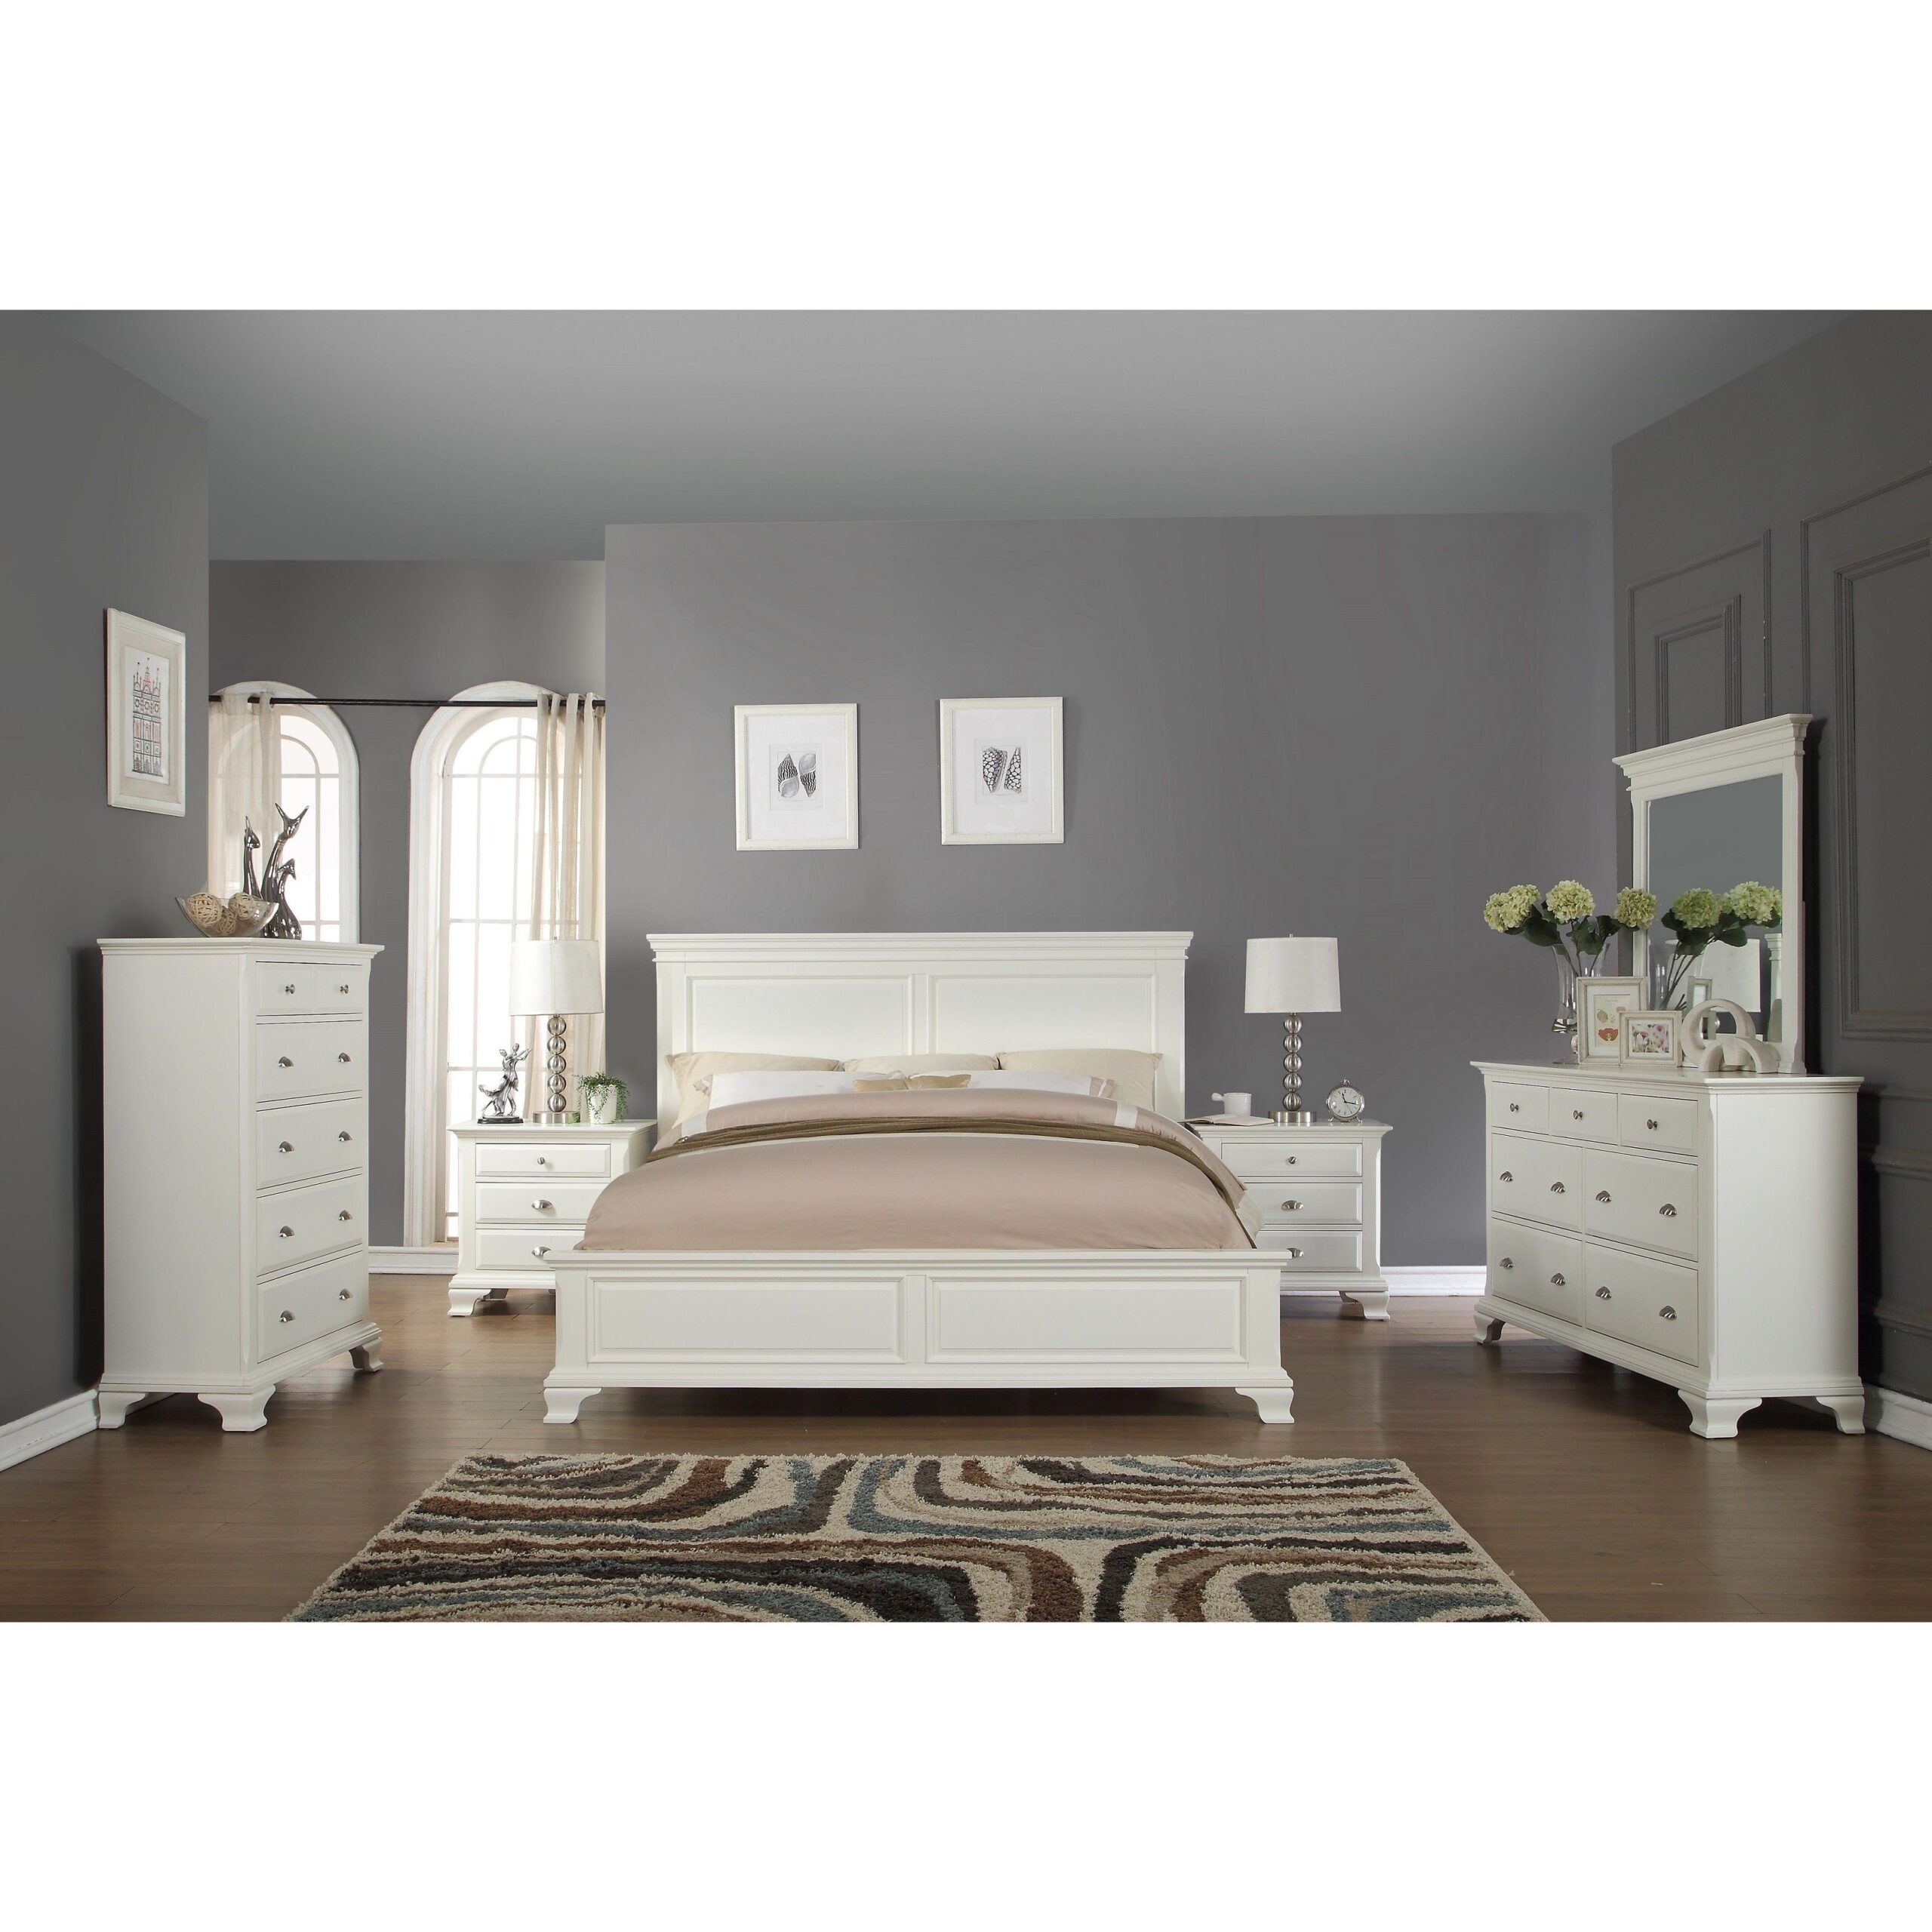 A Stylish Queen Size Bedroom Furniture Set in White